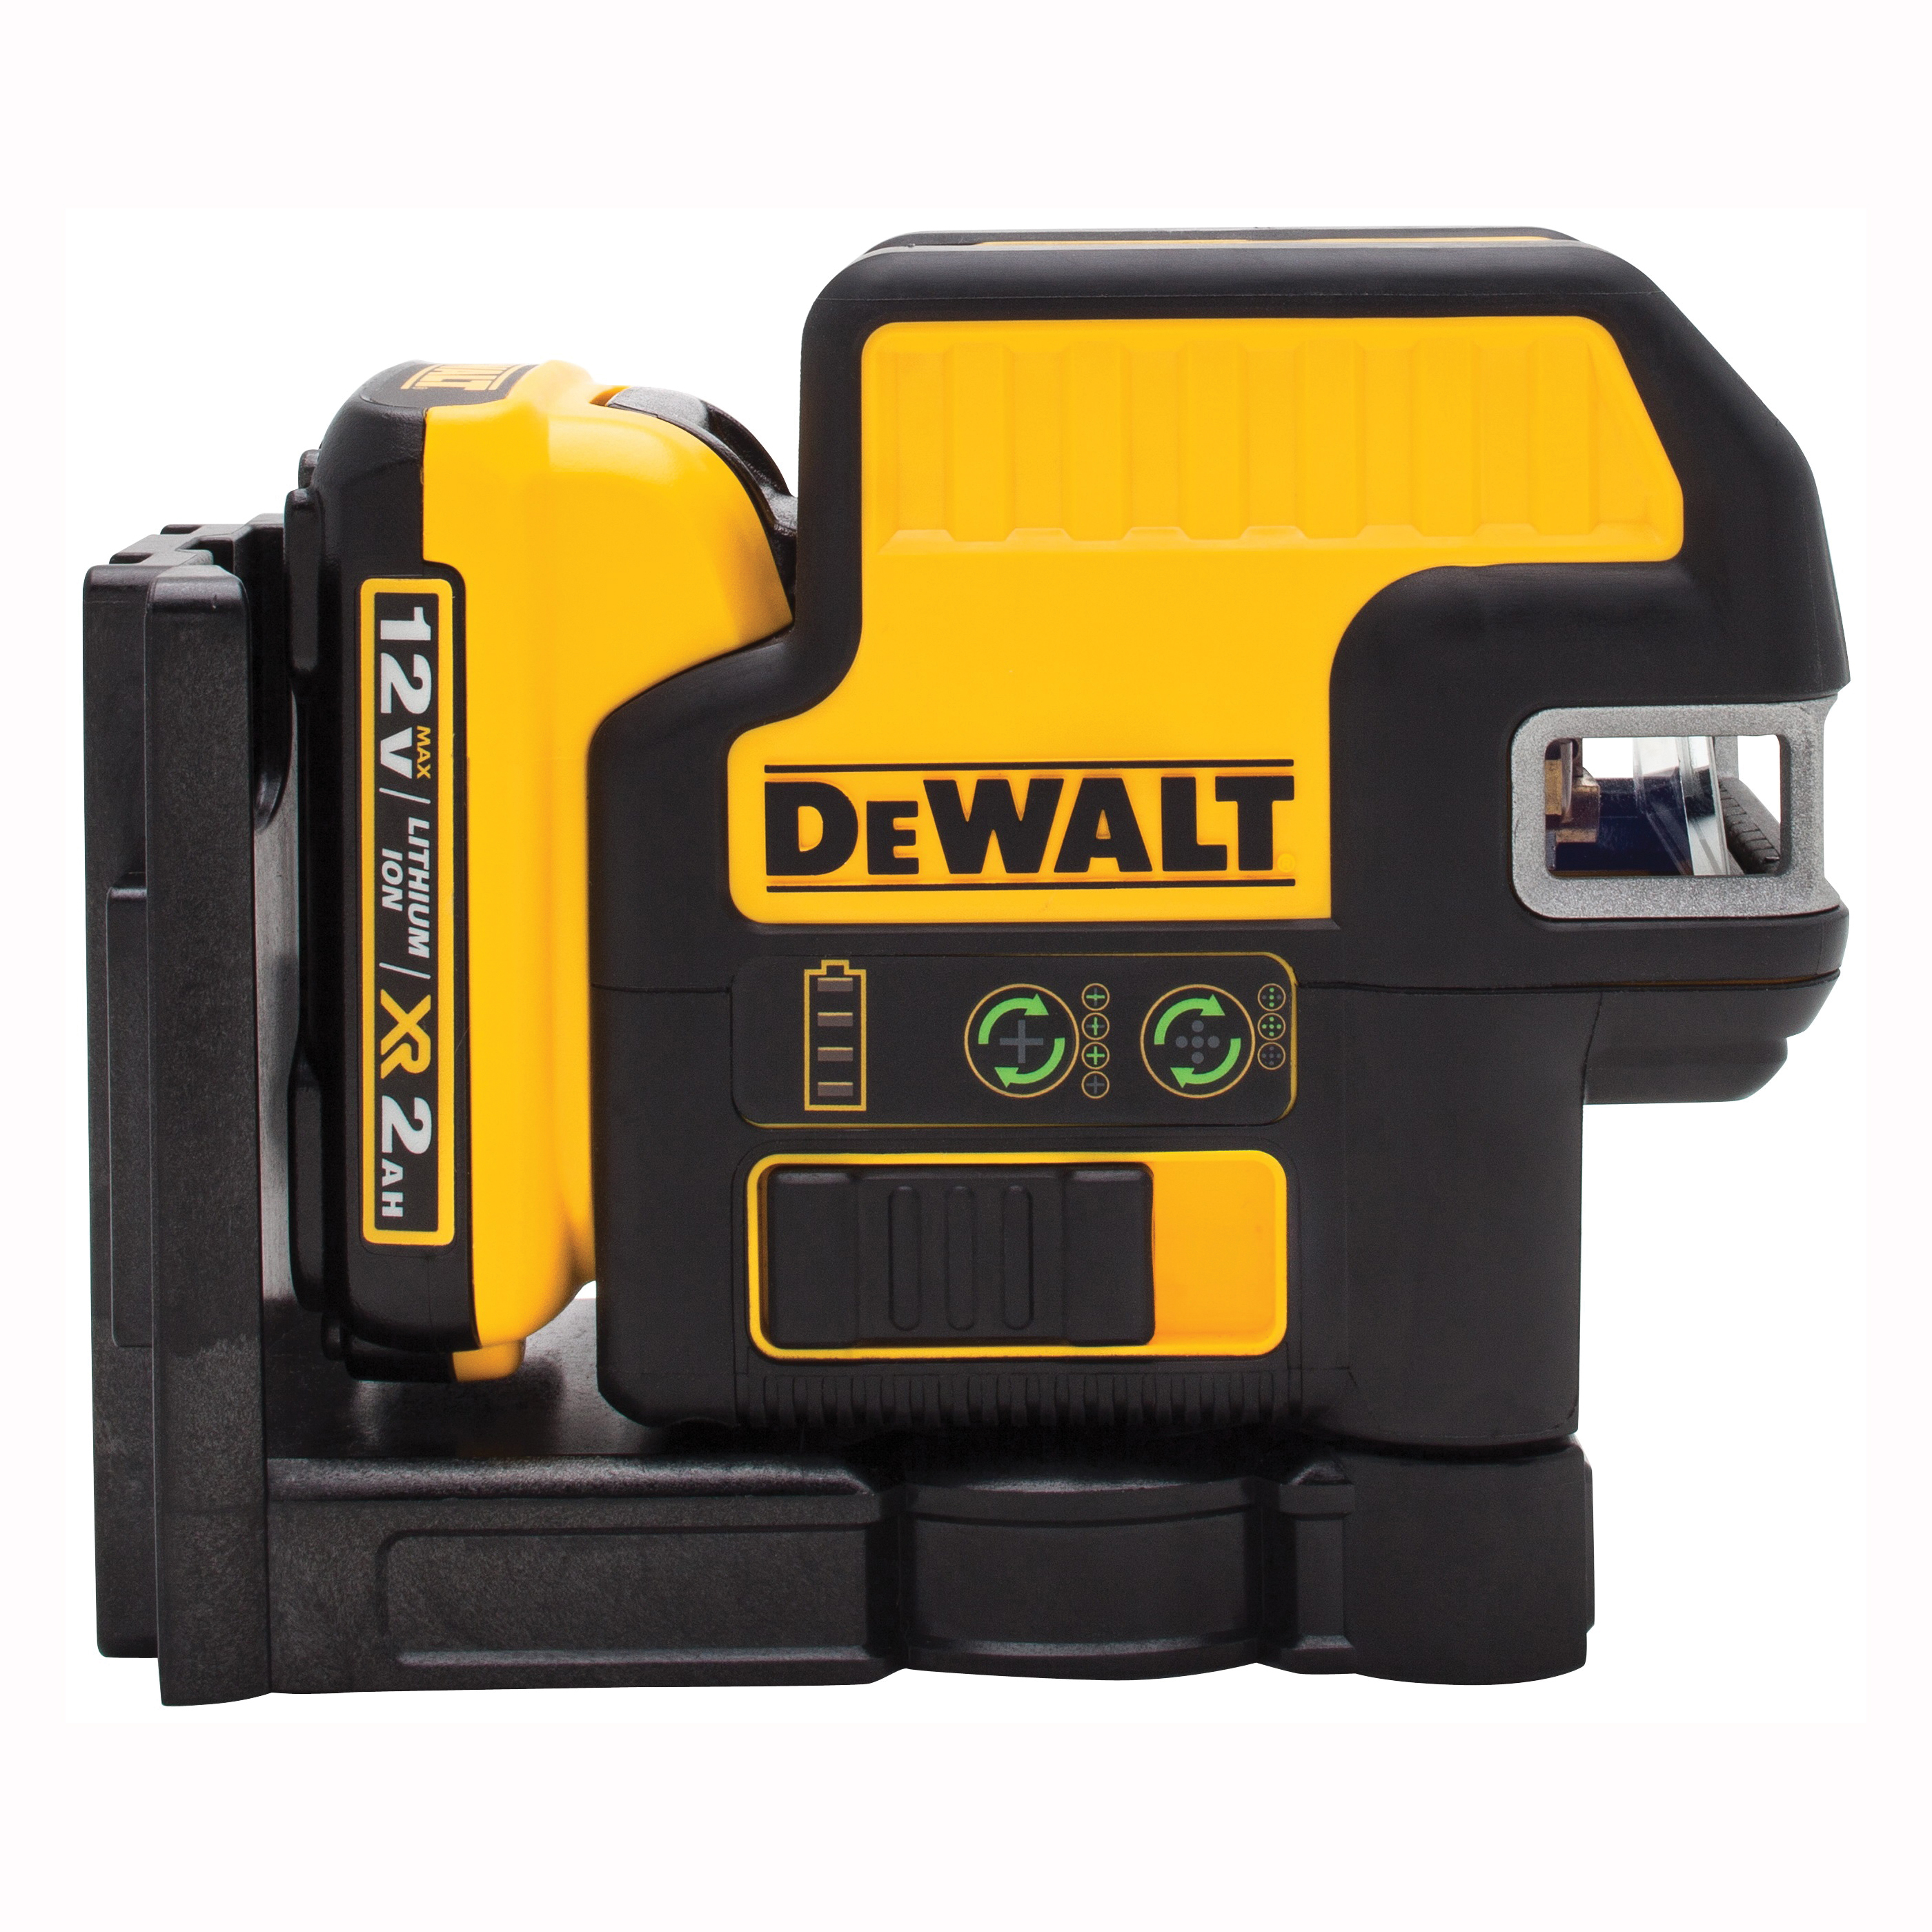 DW0825LG-QU Laser Level, 165 ft, +/-1/8 in at 30 ft Accuracy, Green Laser